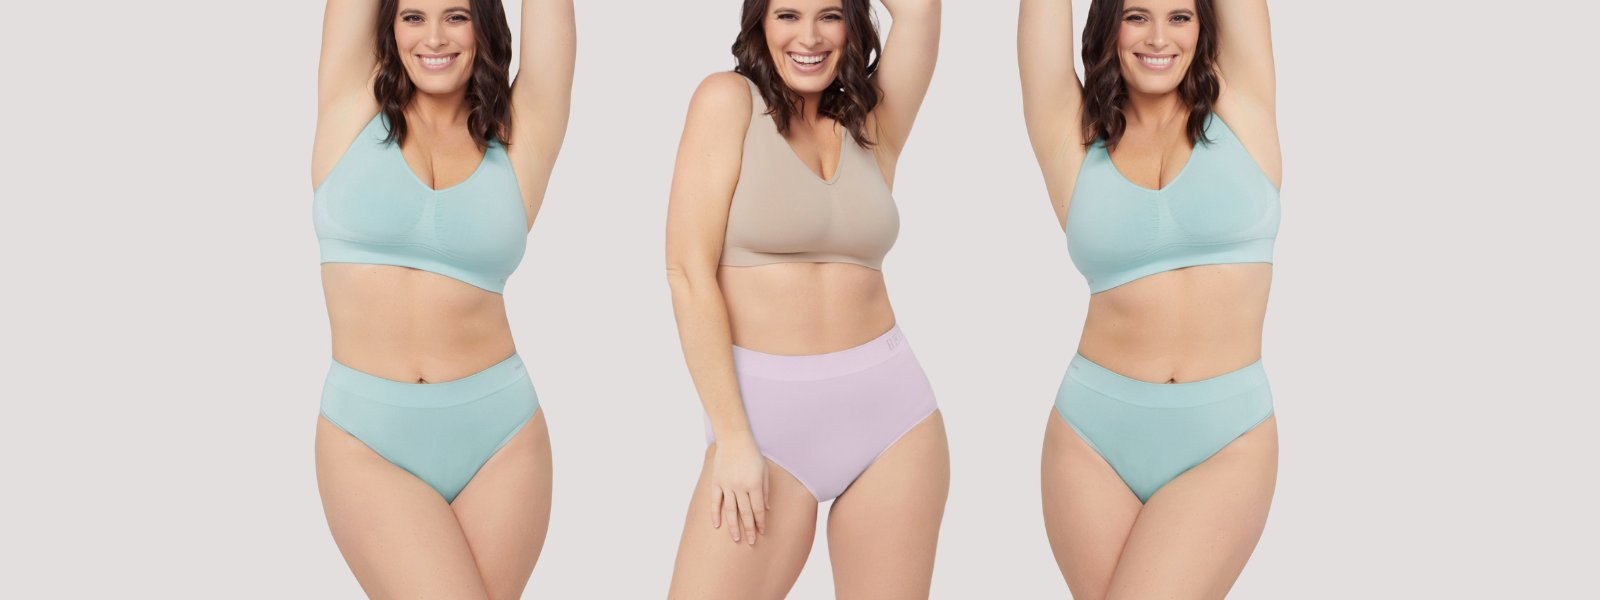 New underwear, wirefree bras, comfortable shapewear, breathable tops and pants | New Arrivals | Bella Bodies Australia